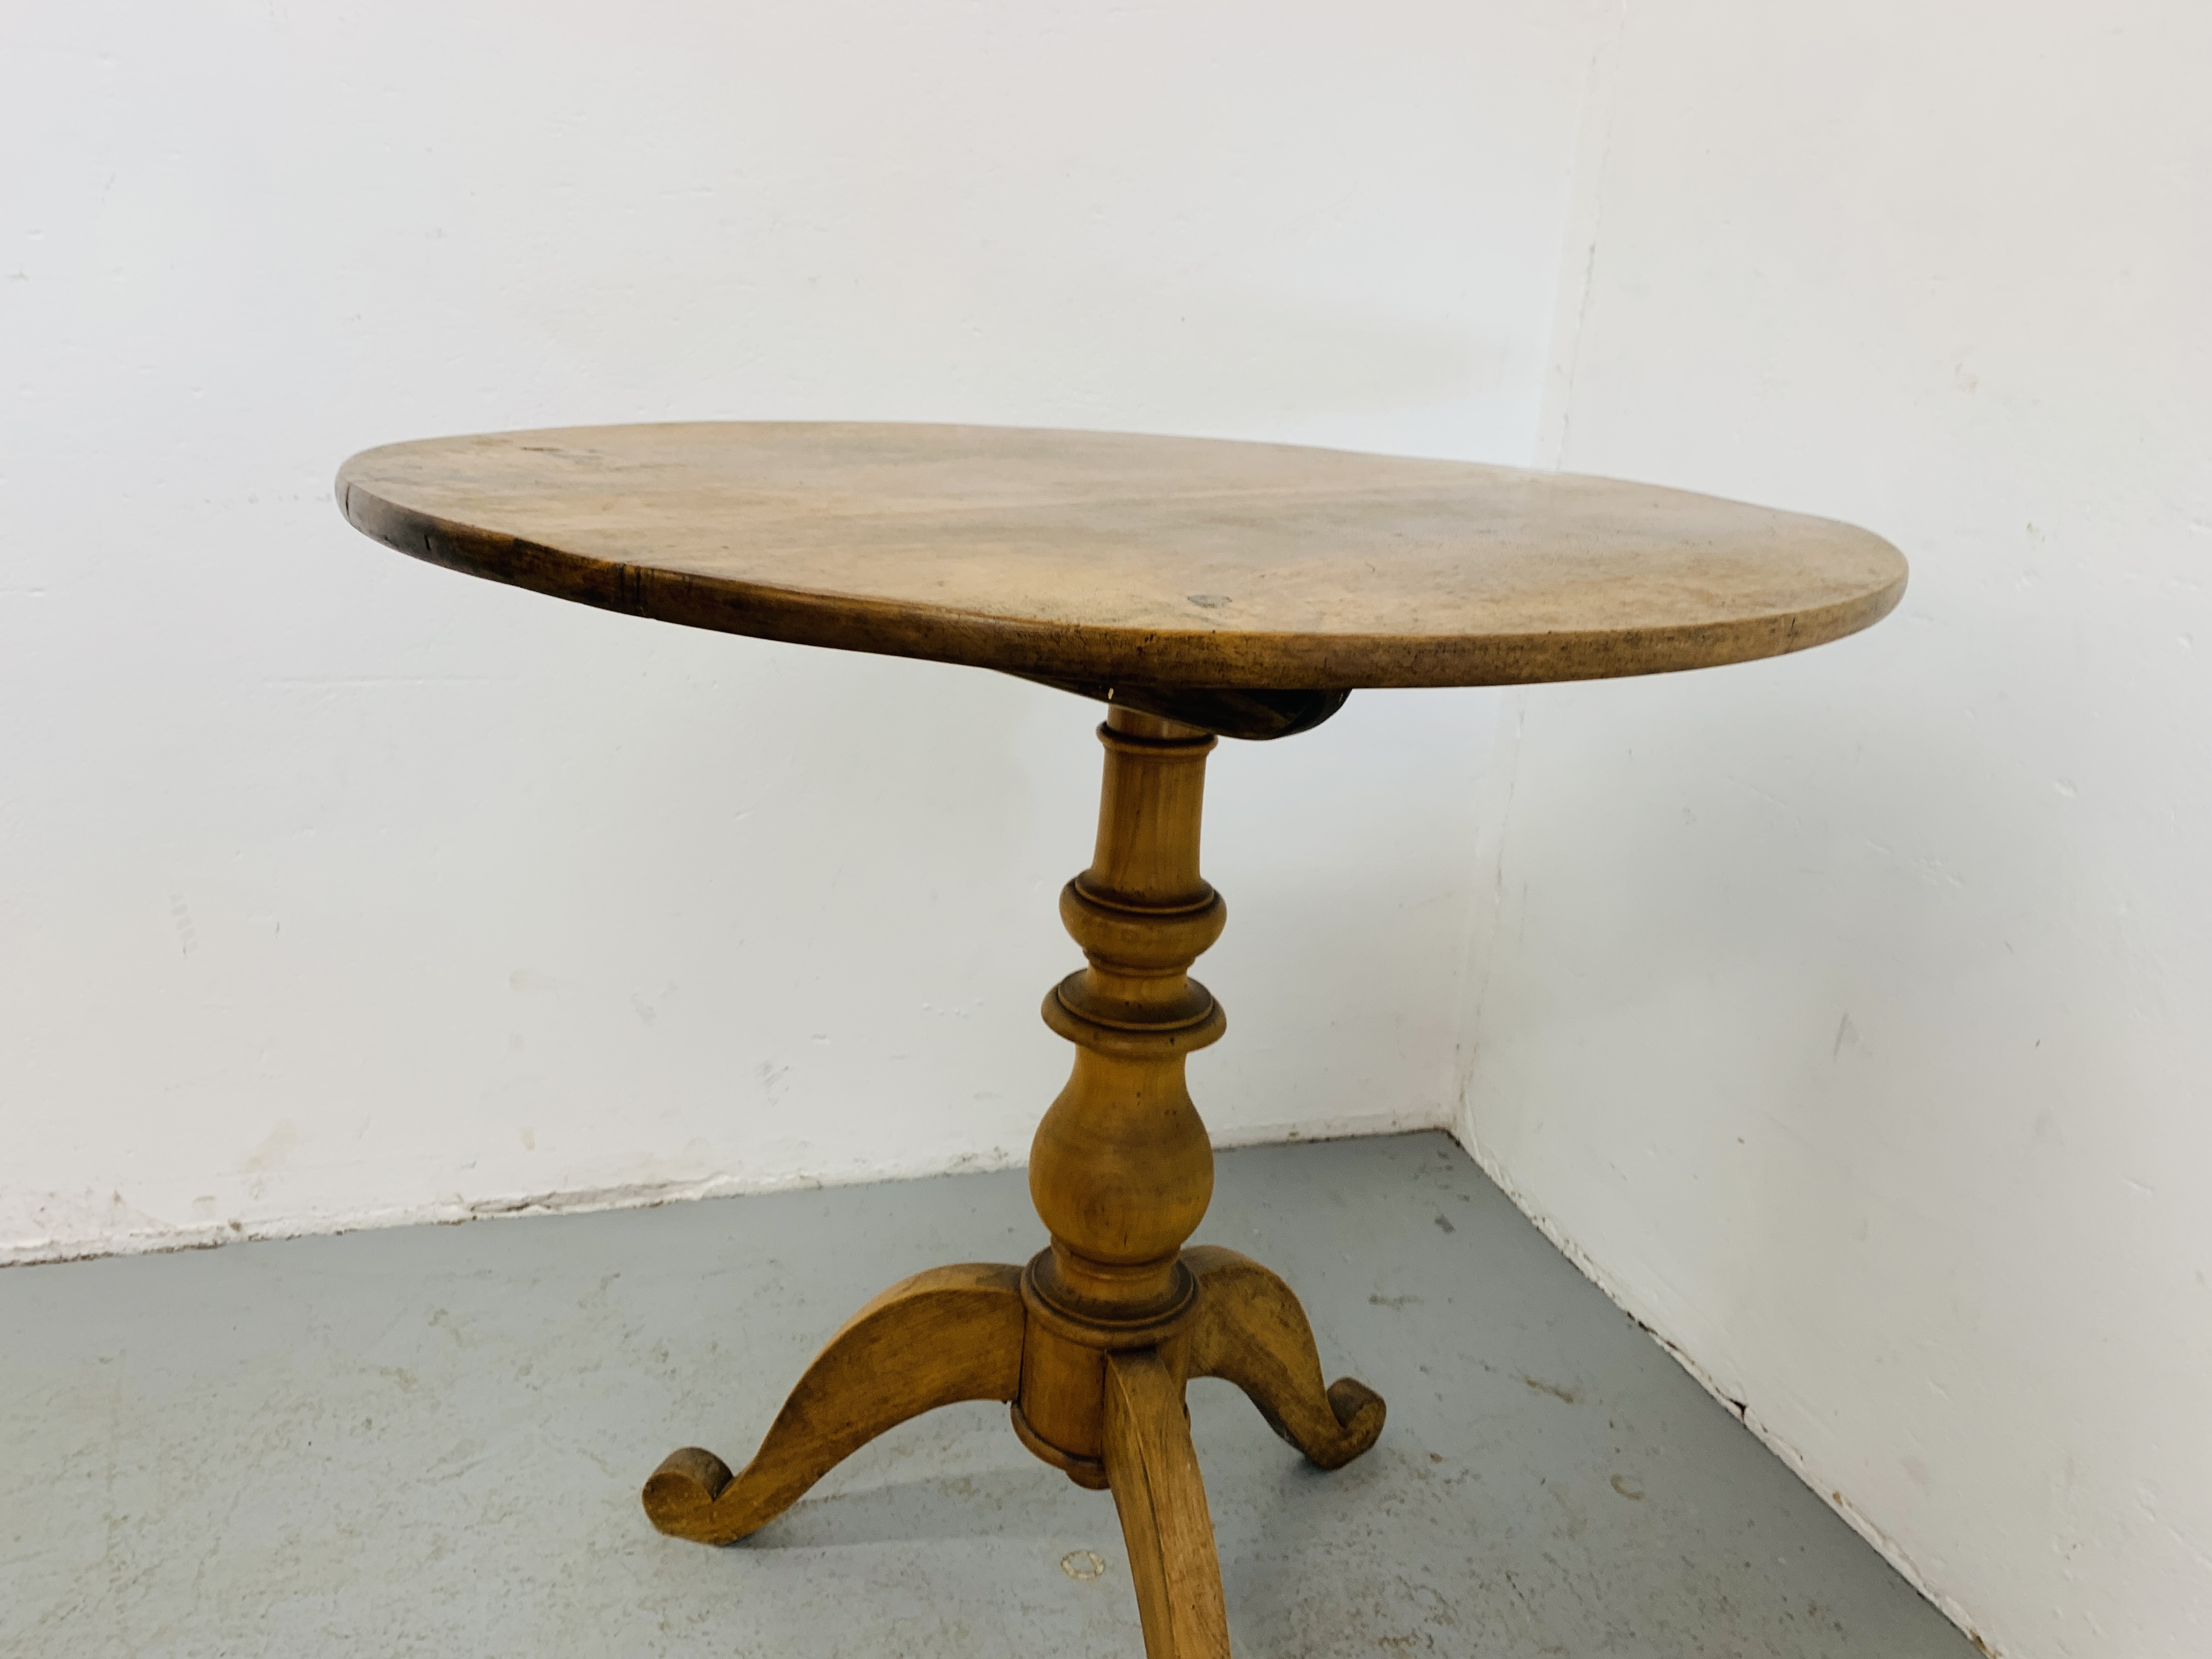 A MAHOGANY TILT TOP PEDESTAL TABLE IWTH OVAL TOP - W 87CM. L 71CM. HEIGHT 78CM. - Image 3 of 6